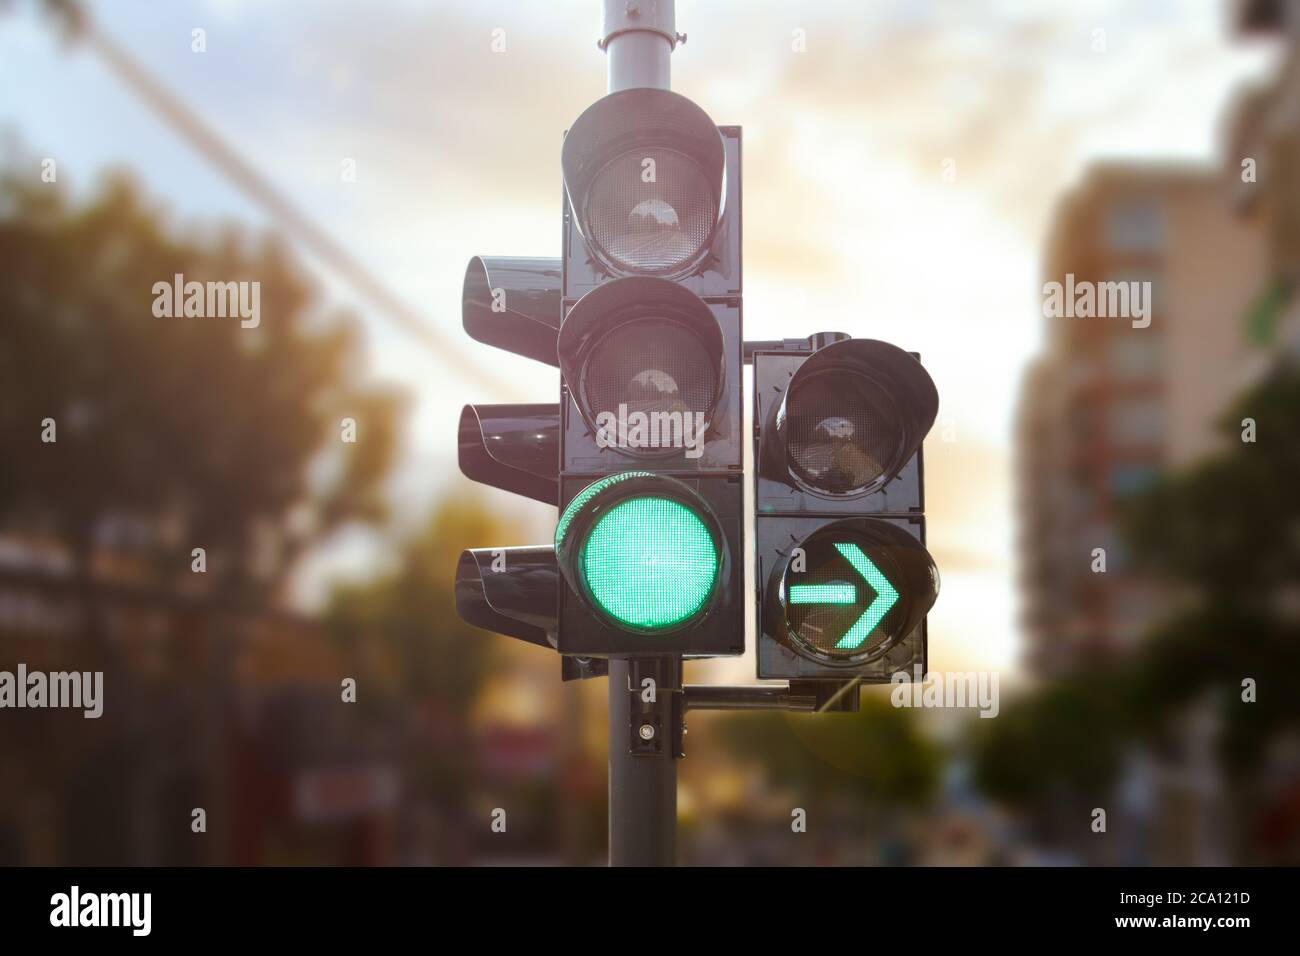 Green traffic light with green arrow light up in city while sunset allows car to turn right Stock Photo